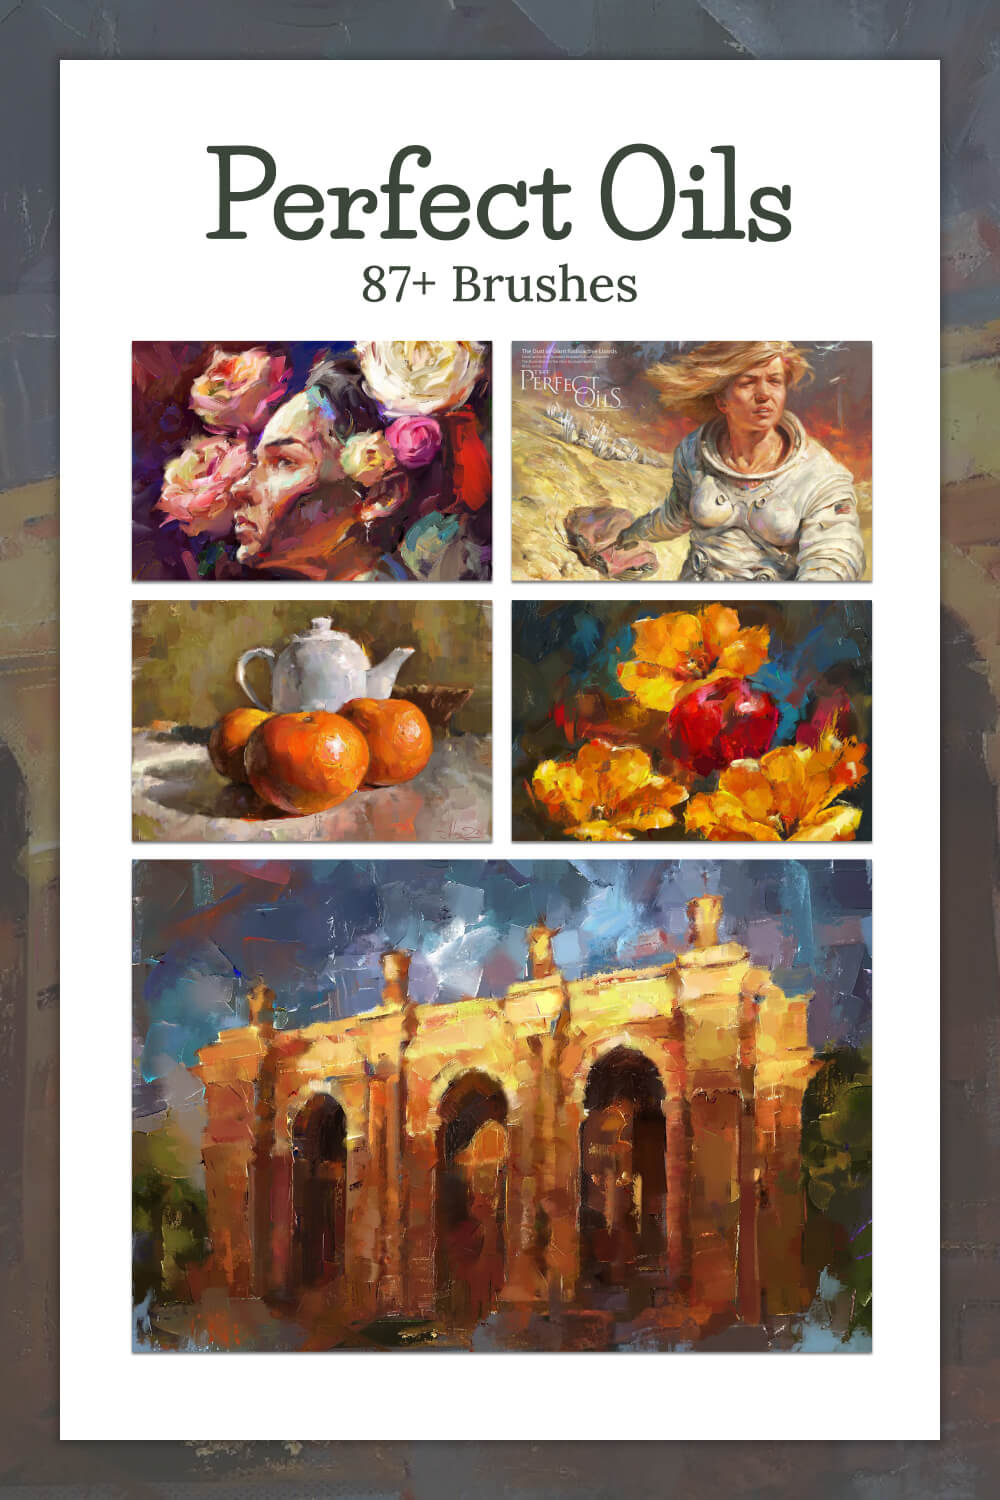 87 brushes create stunning oil paintings.